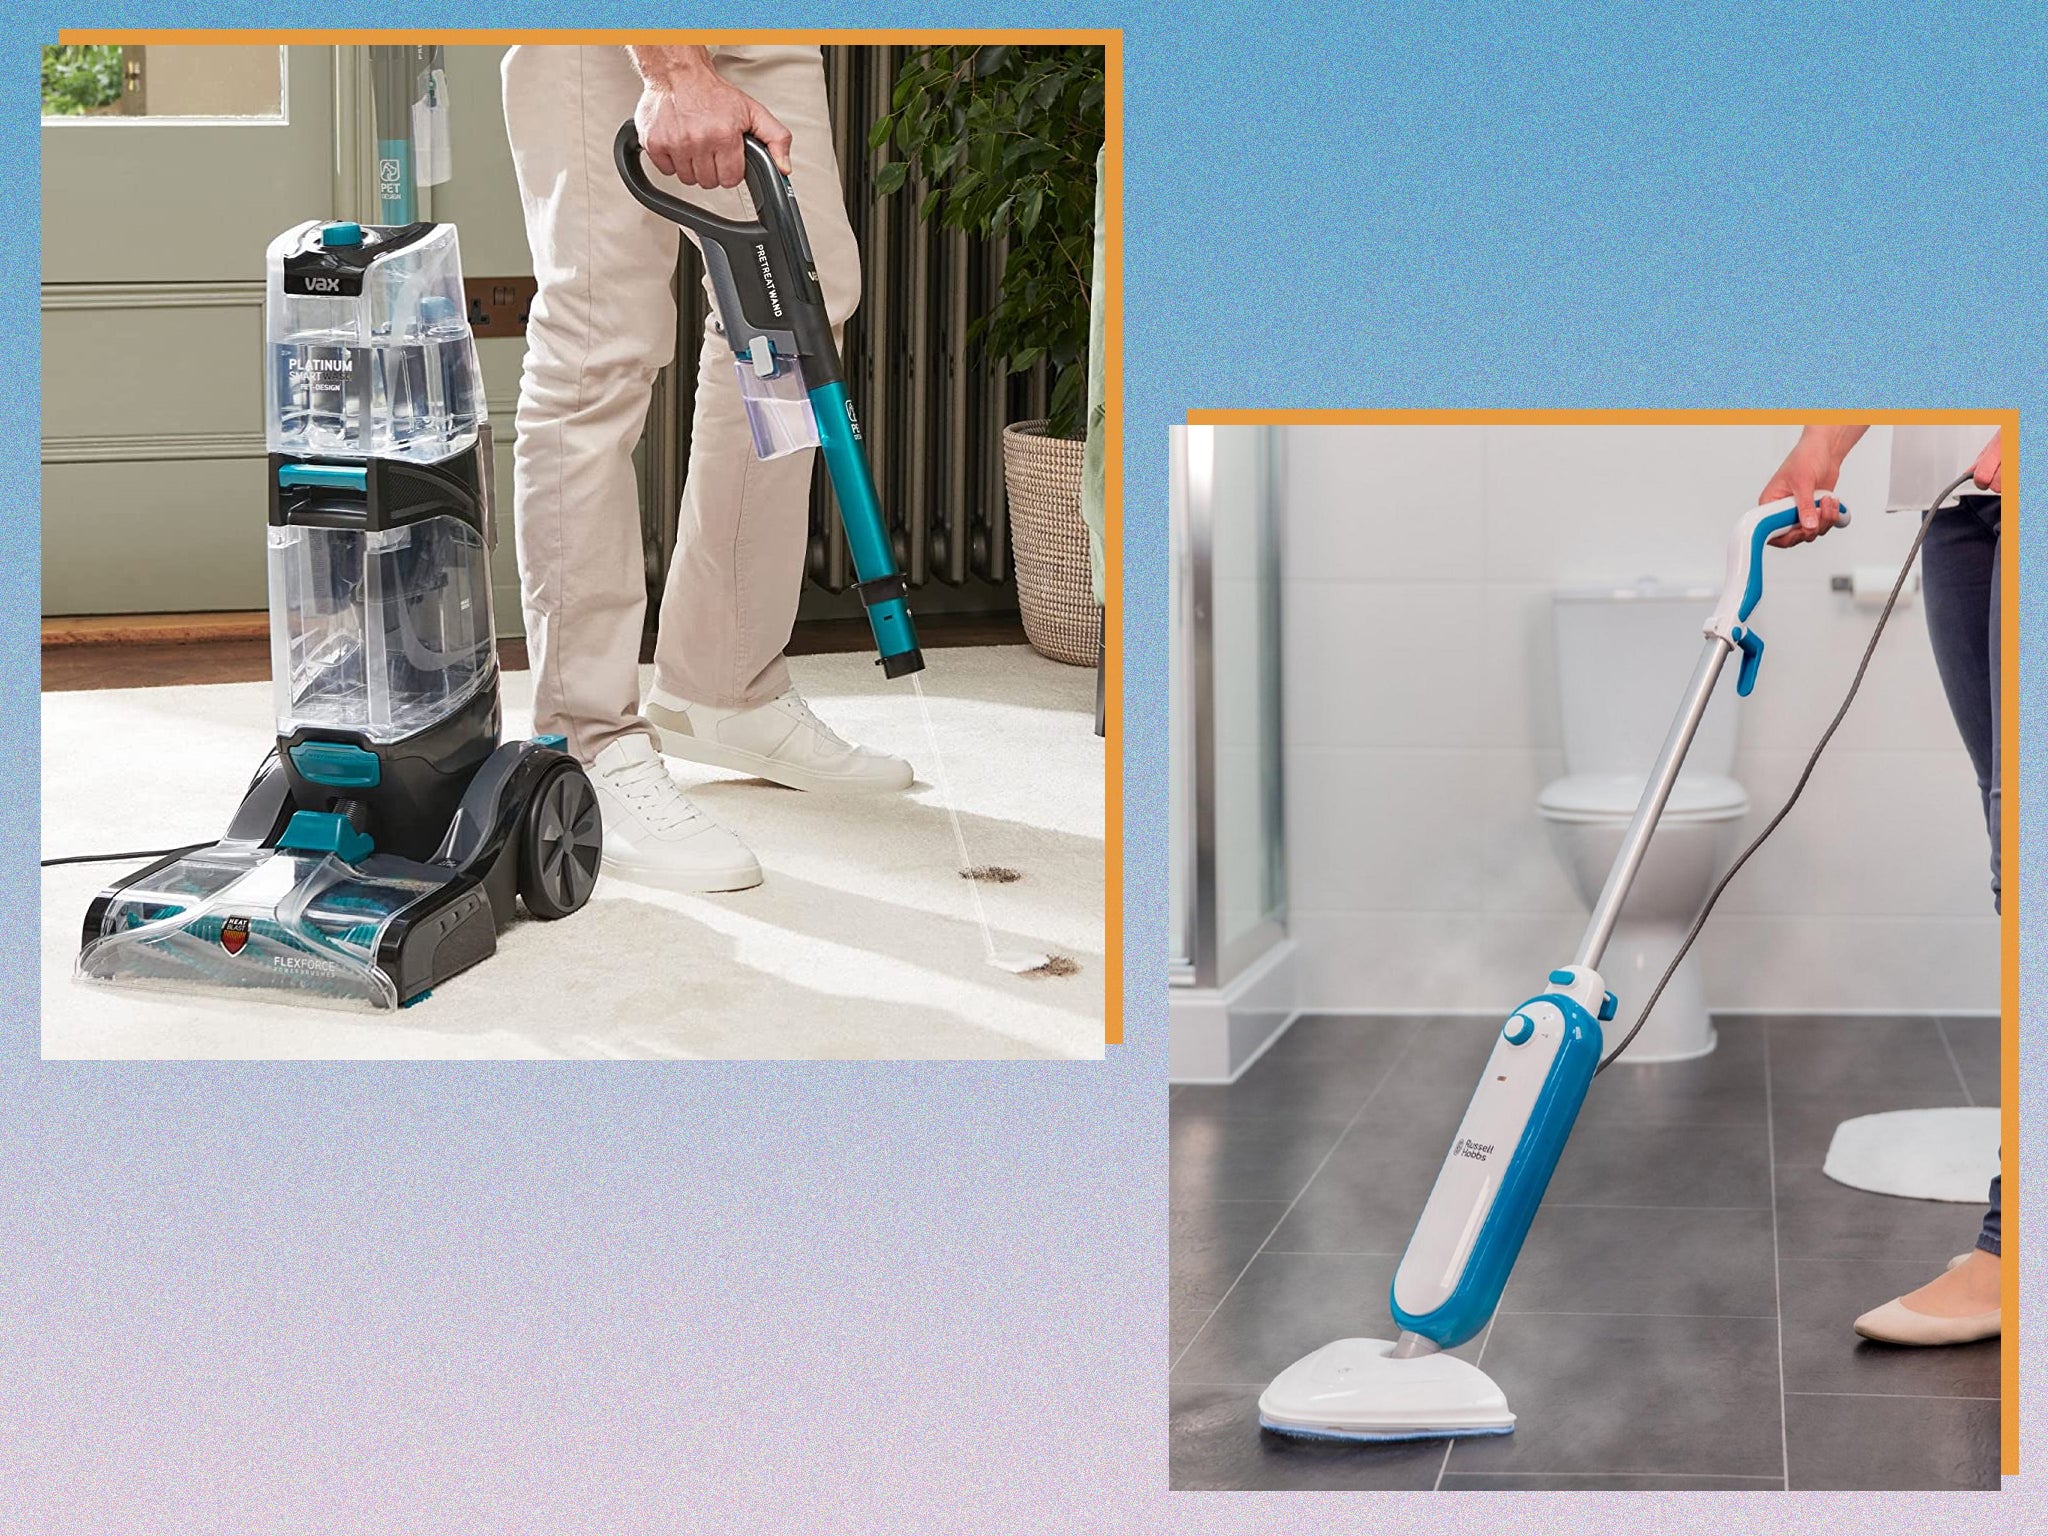 https://static.independent.co.uk/2023/07/27/14/hero%20pic%20best%20indybest%20carpet%20cleaners.jpg